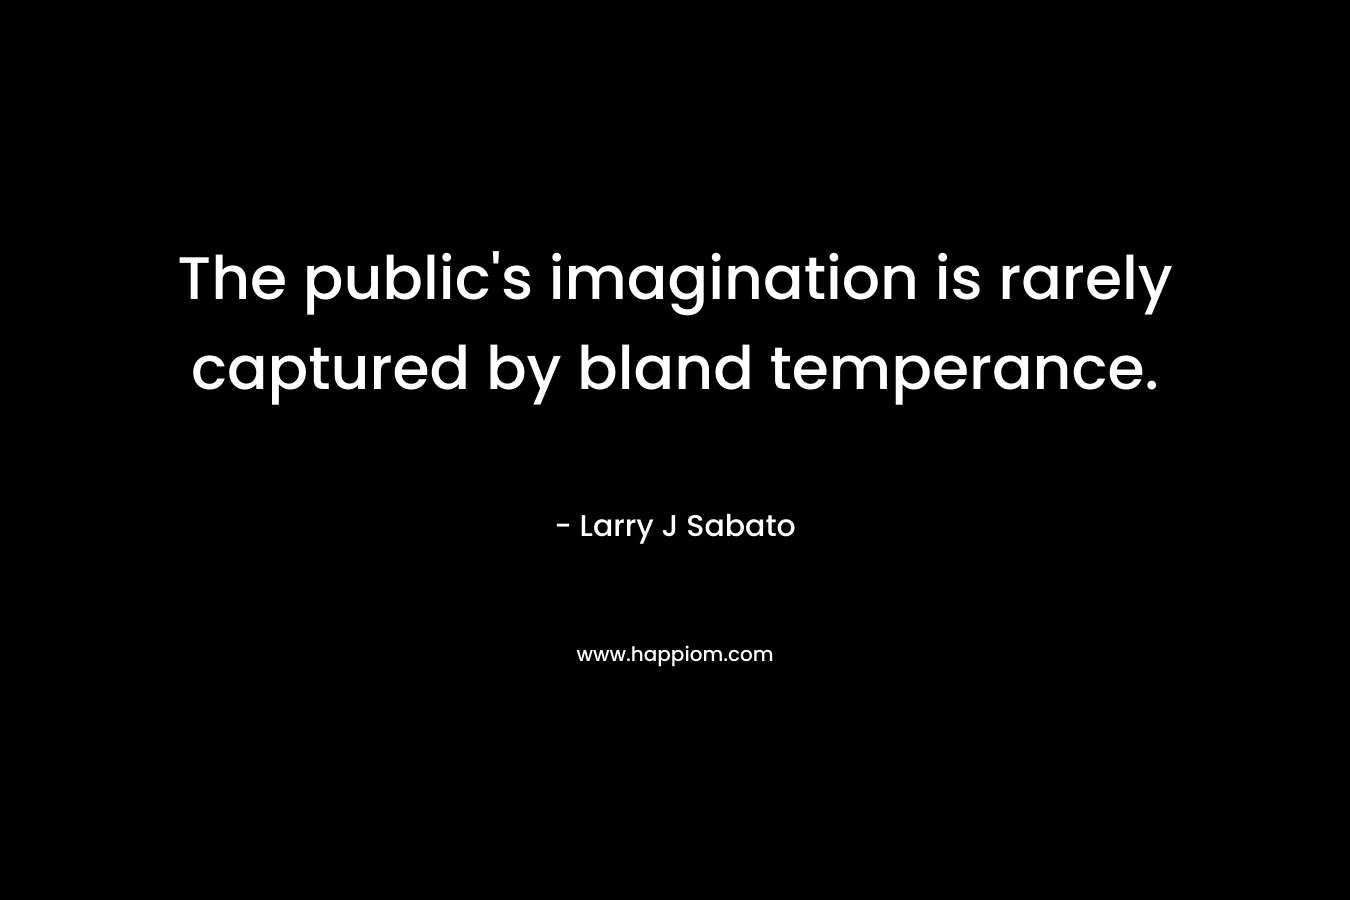 The public’s imagination is rarely captured by bland temperance. – Larry J Sabato